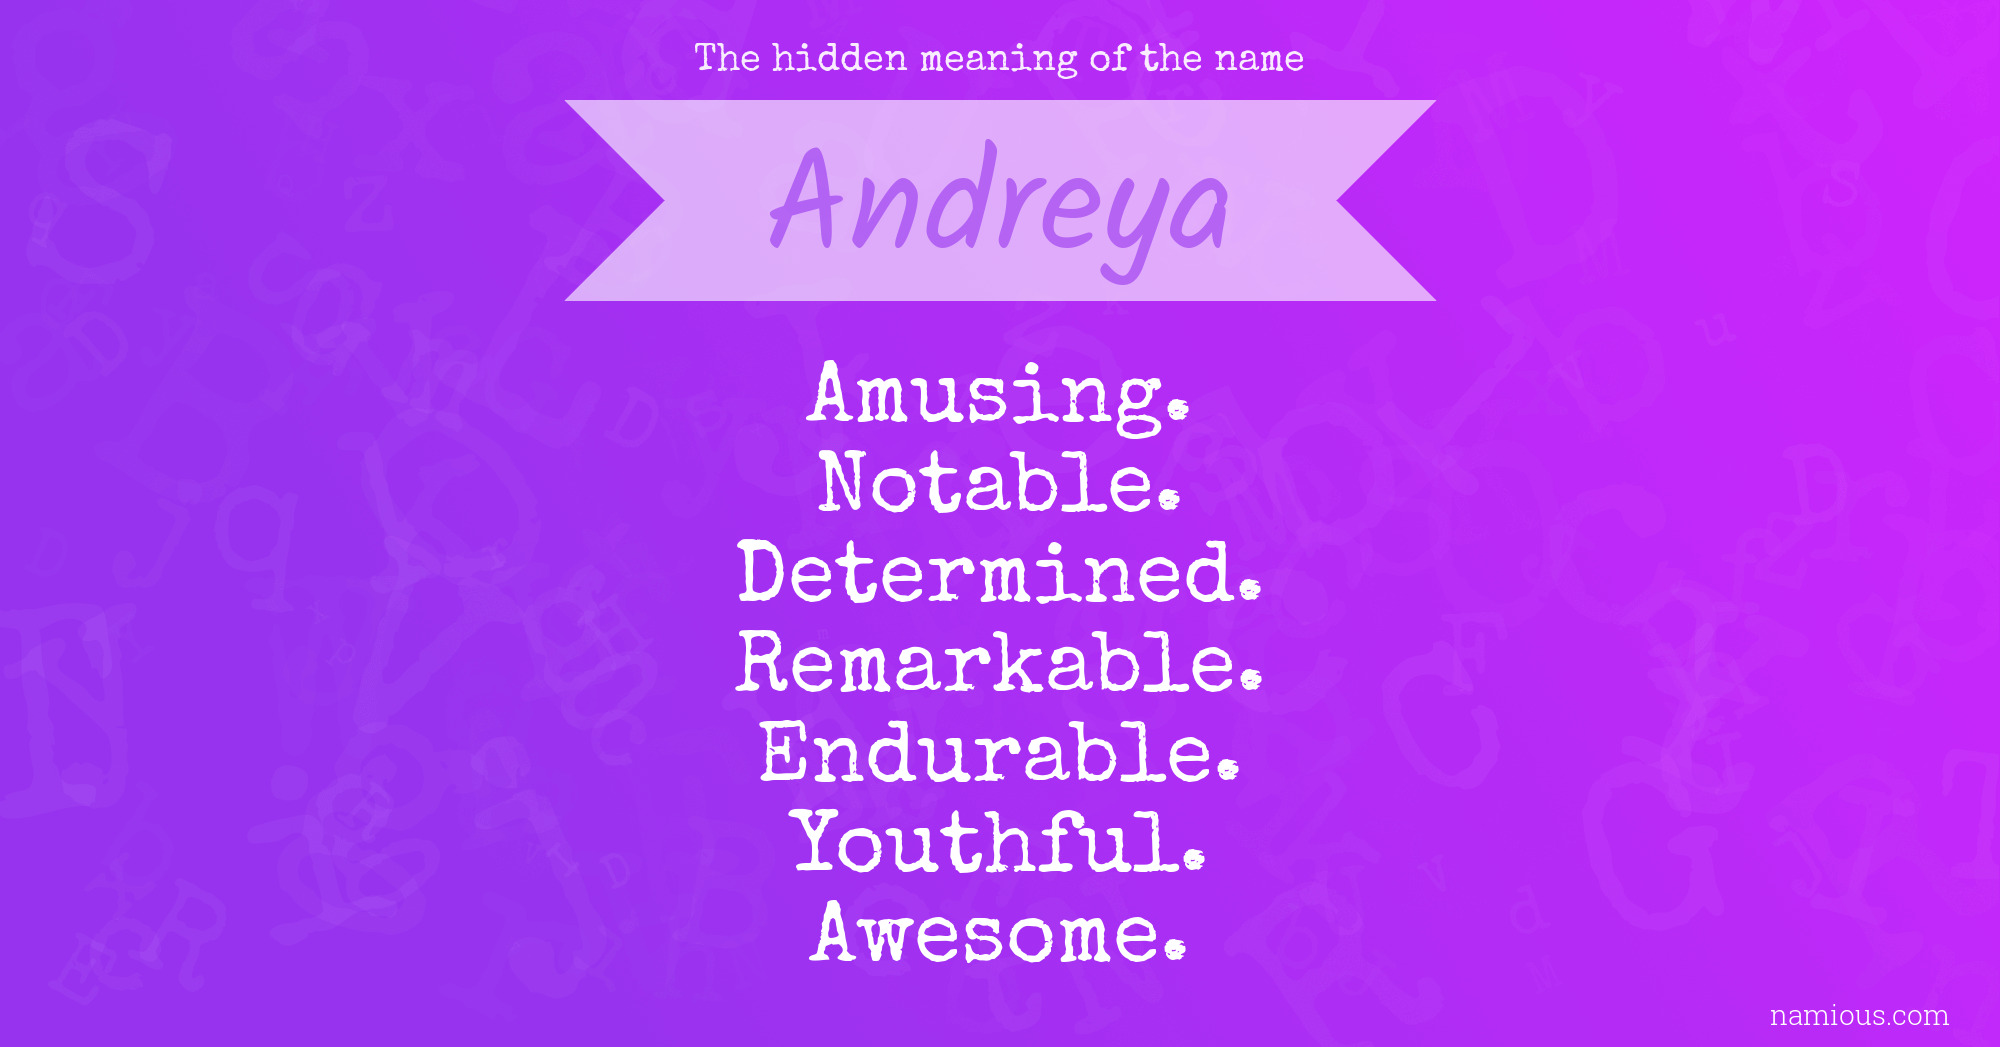 The hidden meaning of the name Andreya